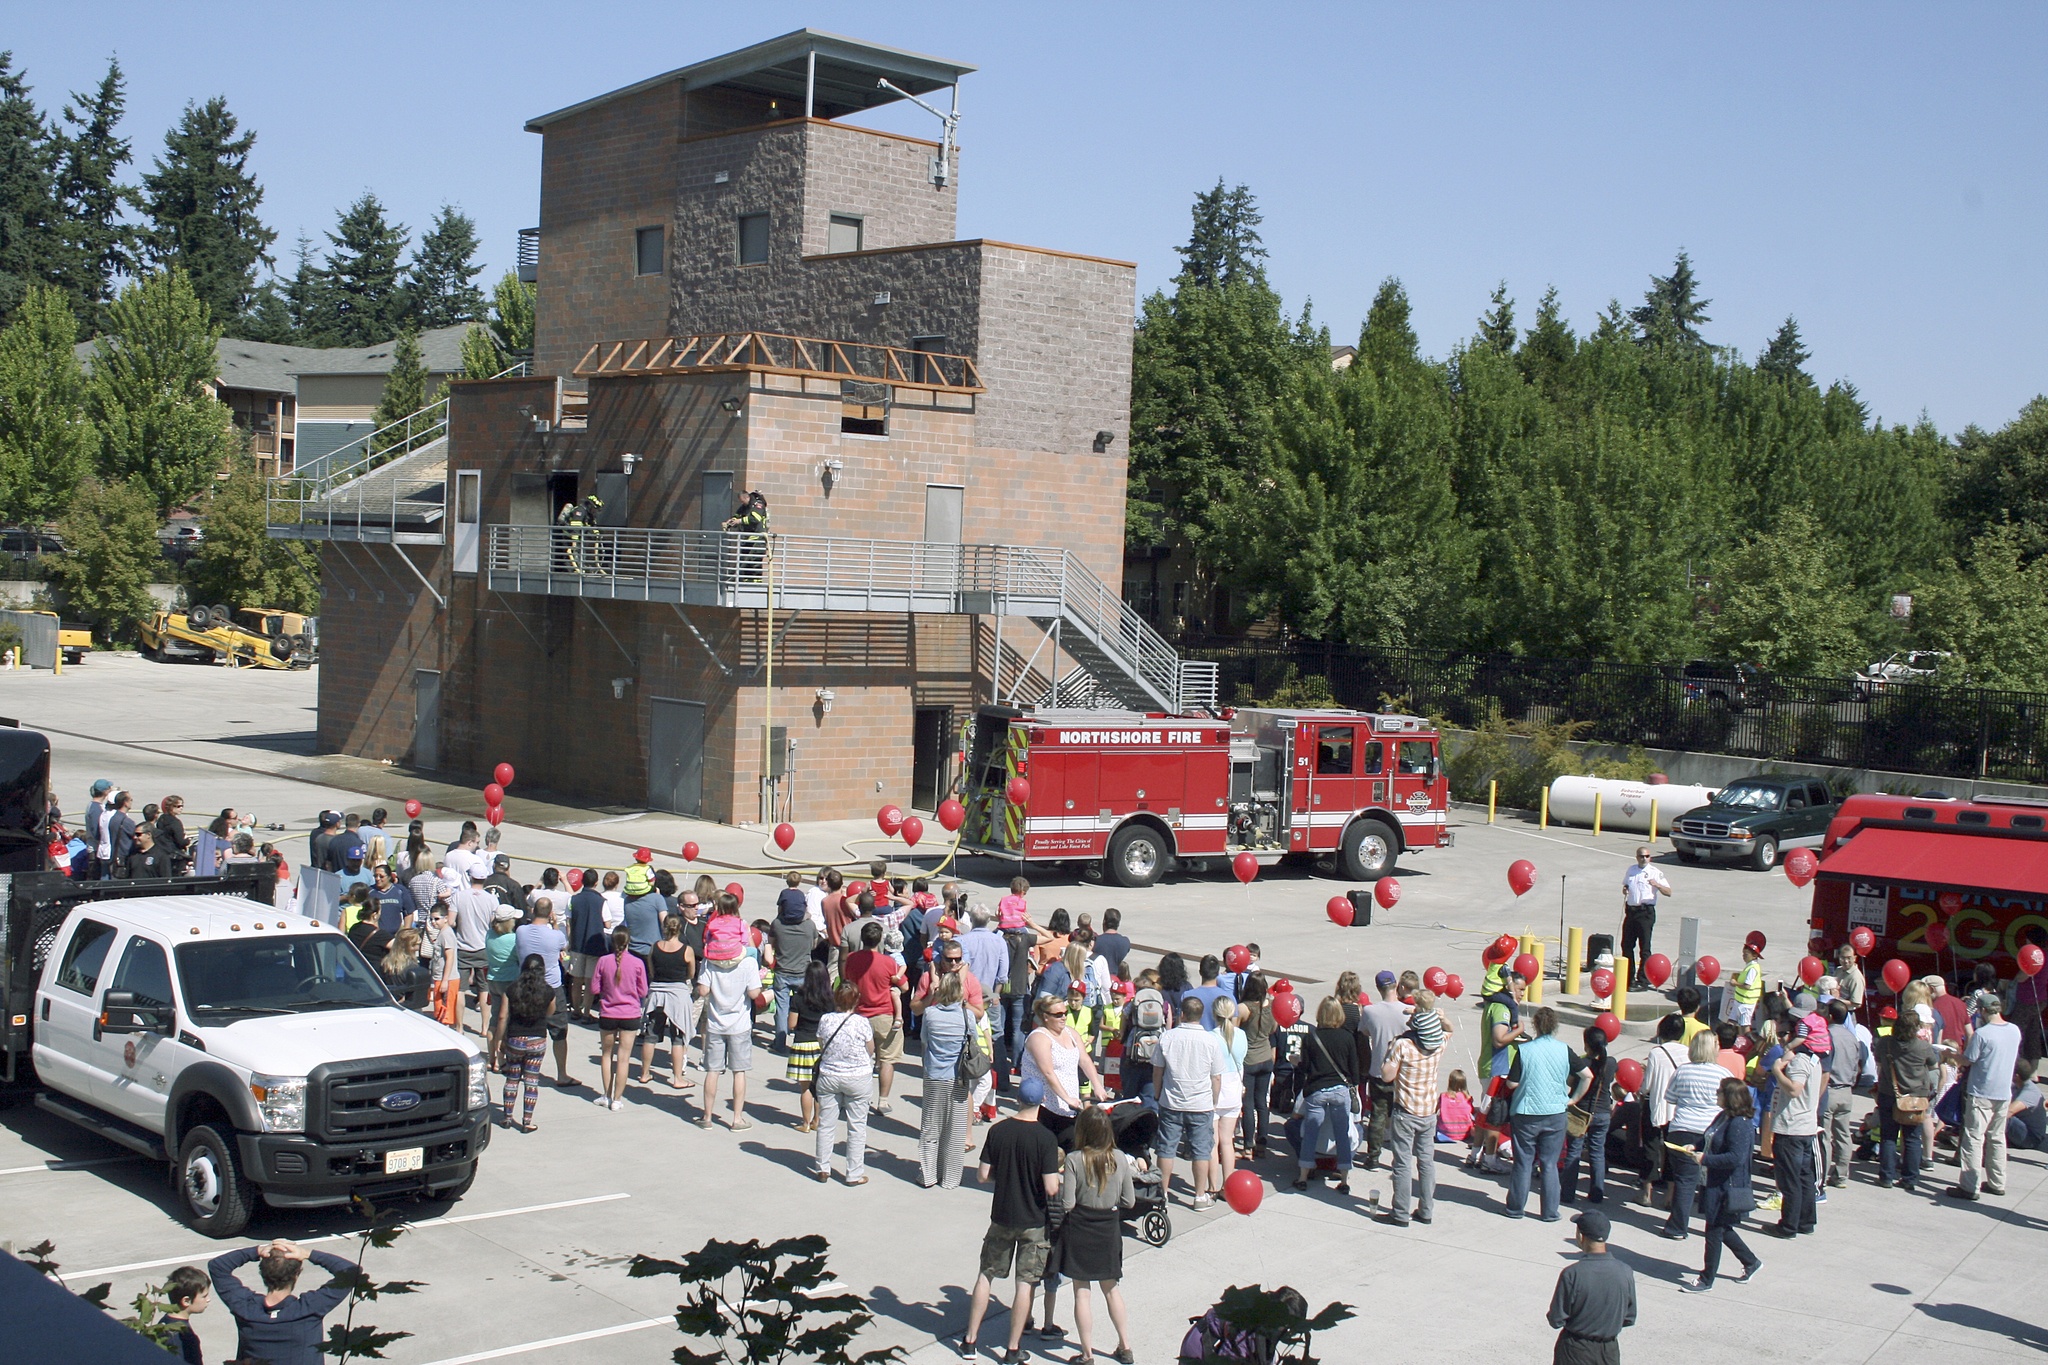 The Northshore Fire Department will be hosting an Open House at their headquarters fire station in Kenmore on June 18. - Contribtued photo